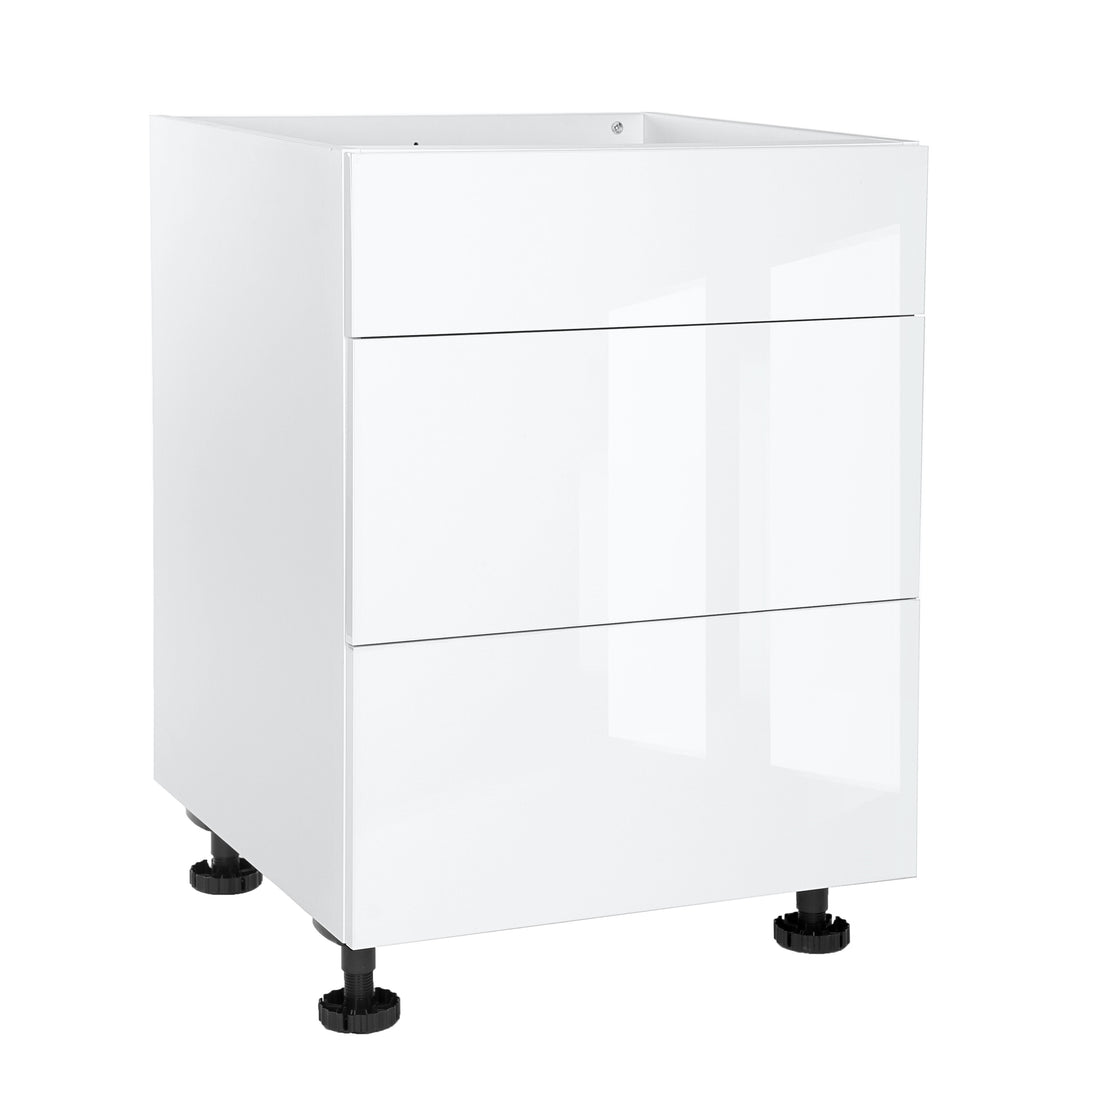 Quick Assemble Modern Style with Soft Close 24 in Base Kitchen Cabinet, 3 Drawer (24 in W x 24 in D x 34.50 in H) -  Pro-Edge HD